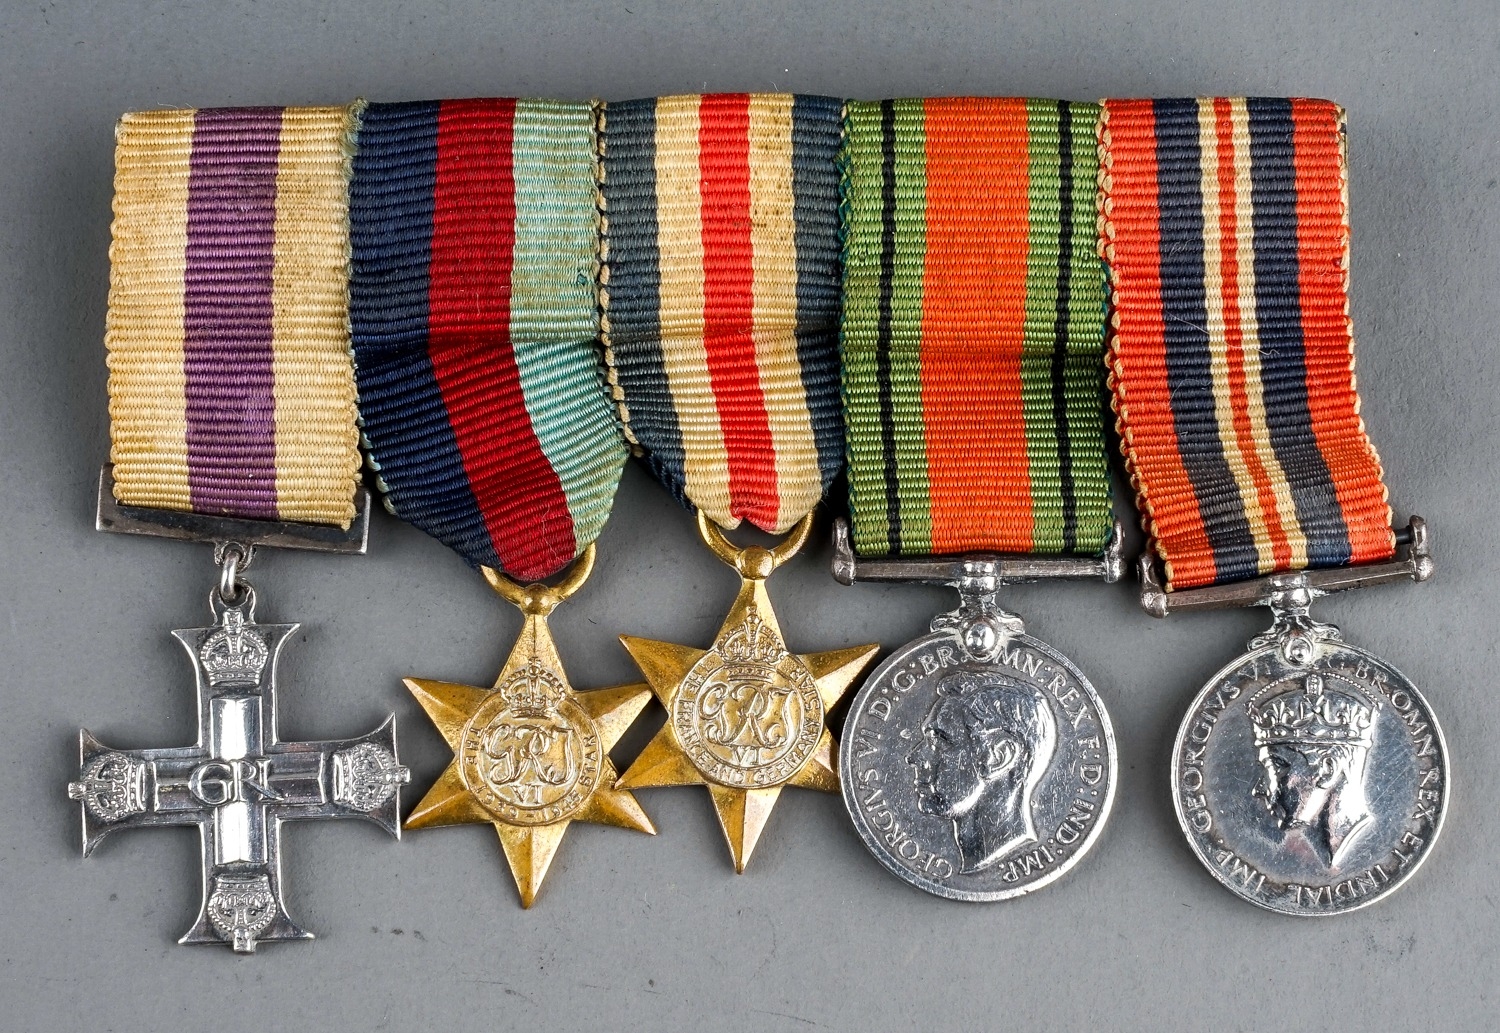 Miniature set of WW2 medals including Military Cross 1935/45 Star, France & Germany star, Defence